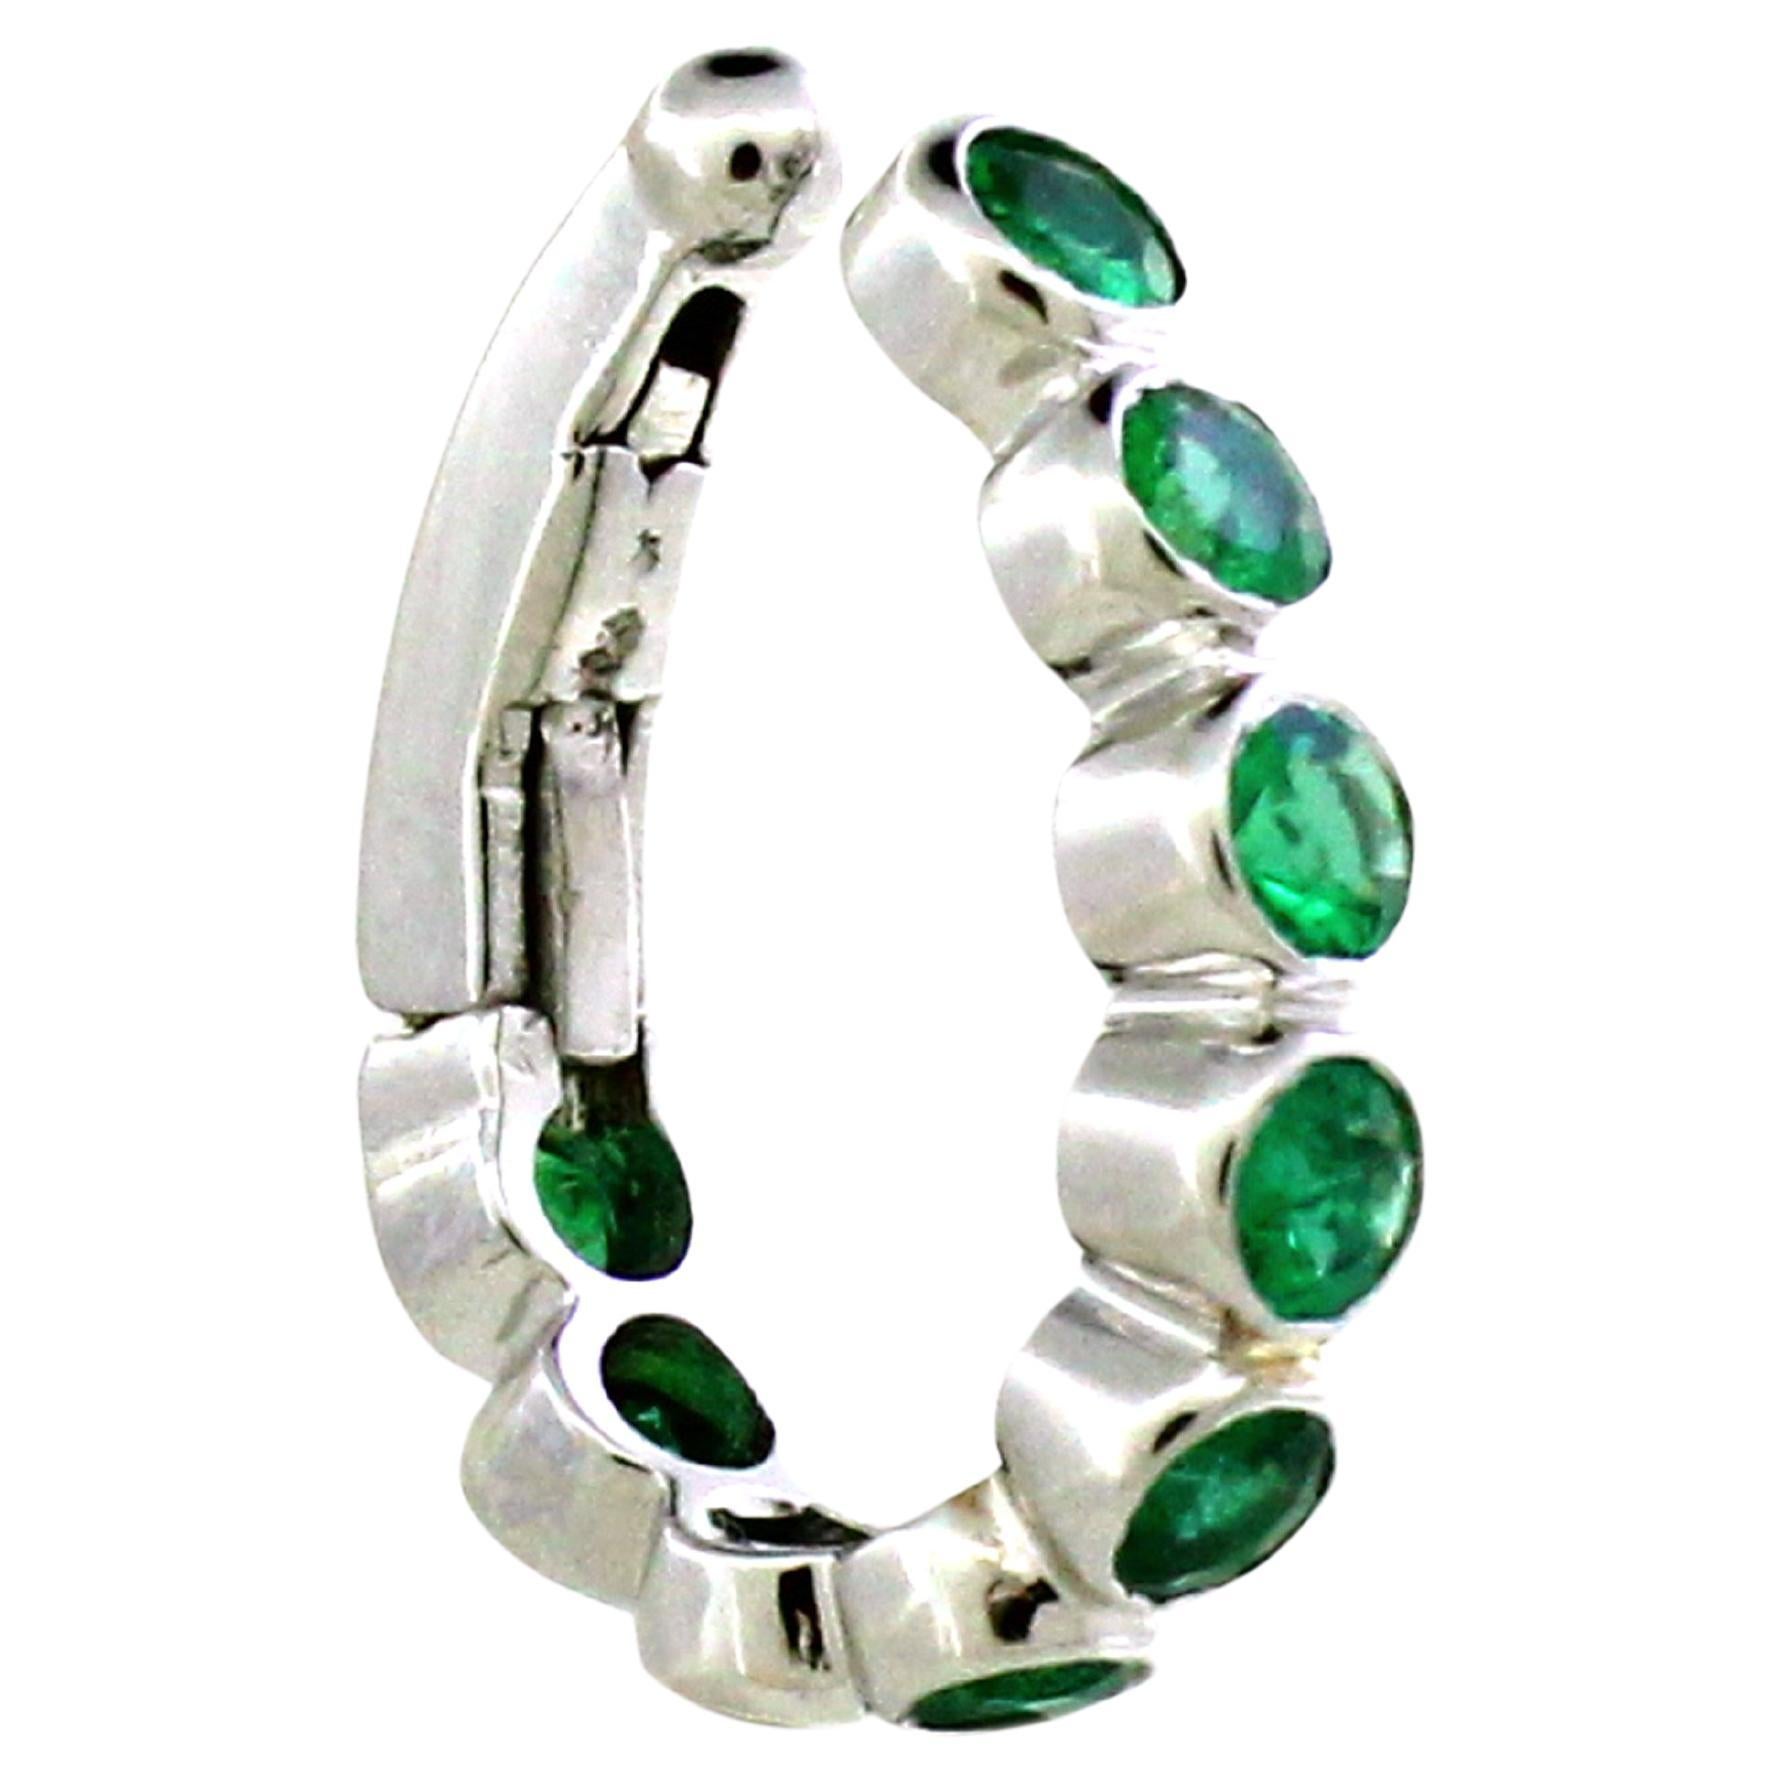 0.50 cts of Emerald Clip-on-earrings For Sale